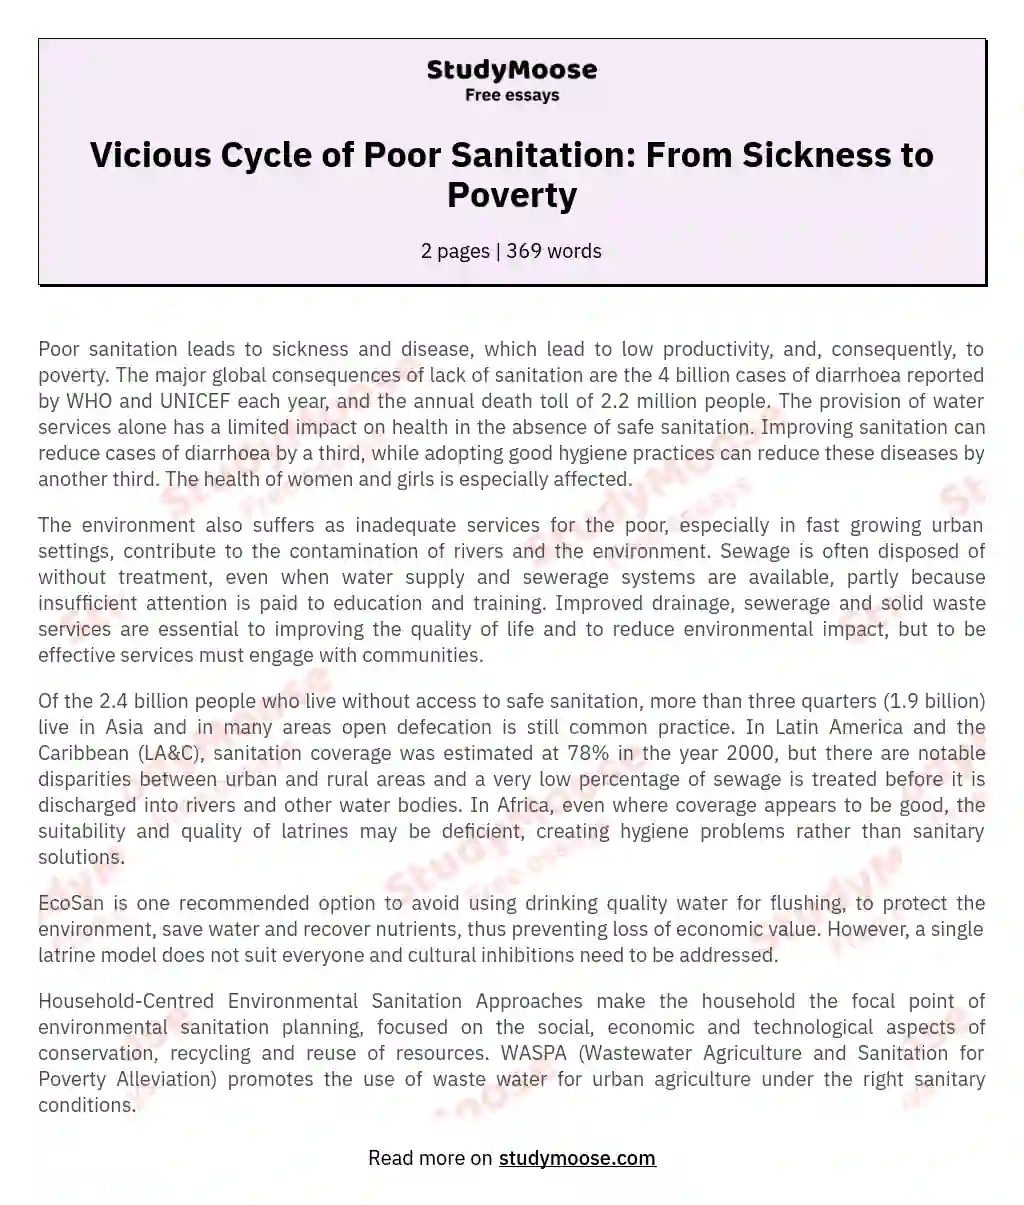 Vicious Cycle of Poor Sanitation: From Sickness to Poverty essay